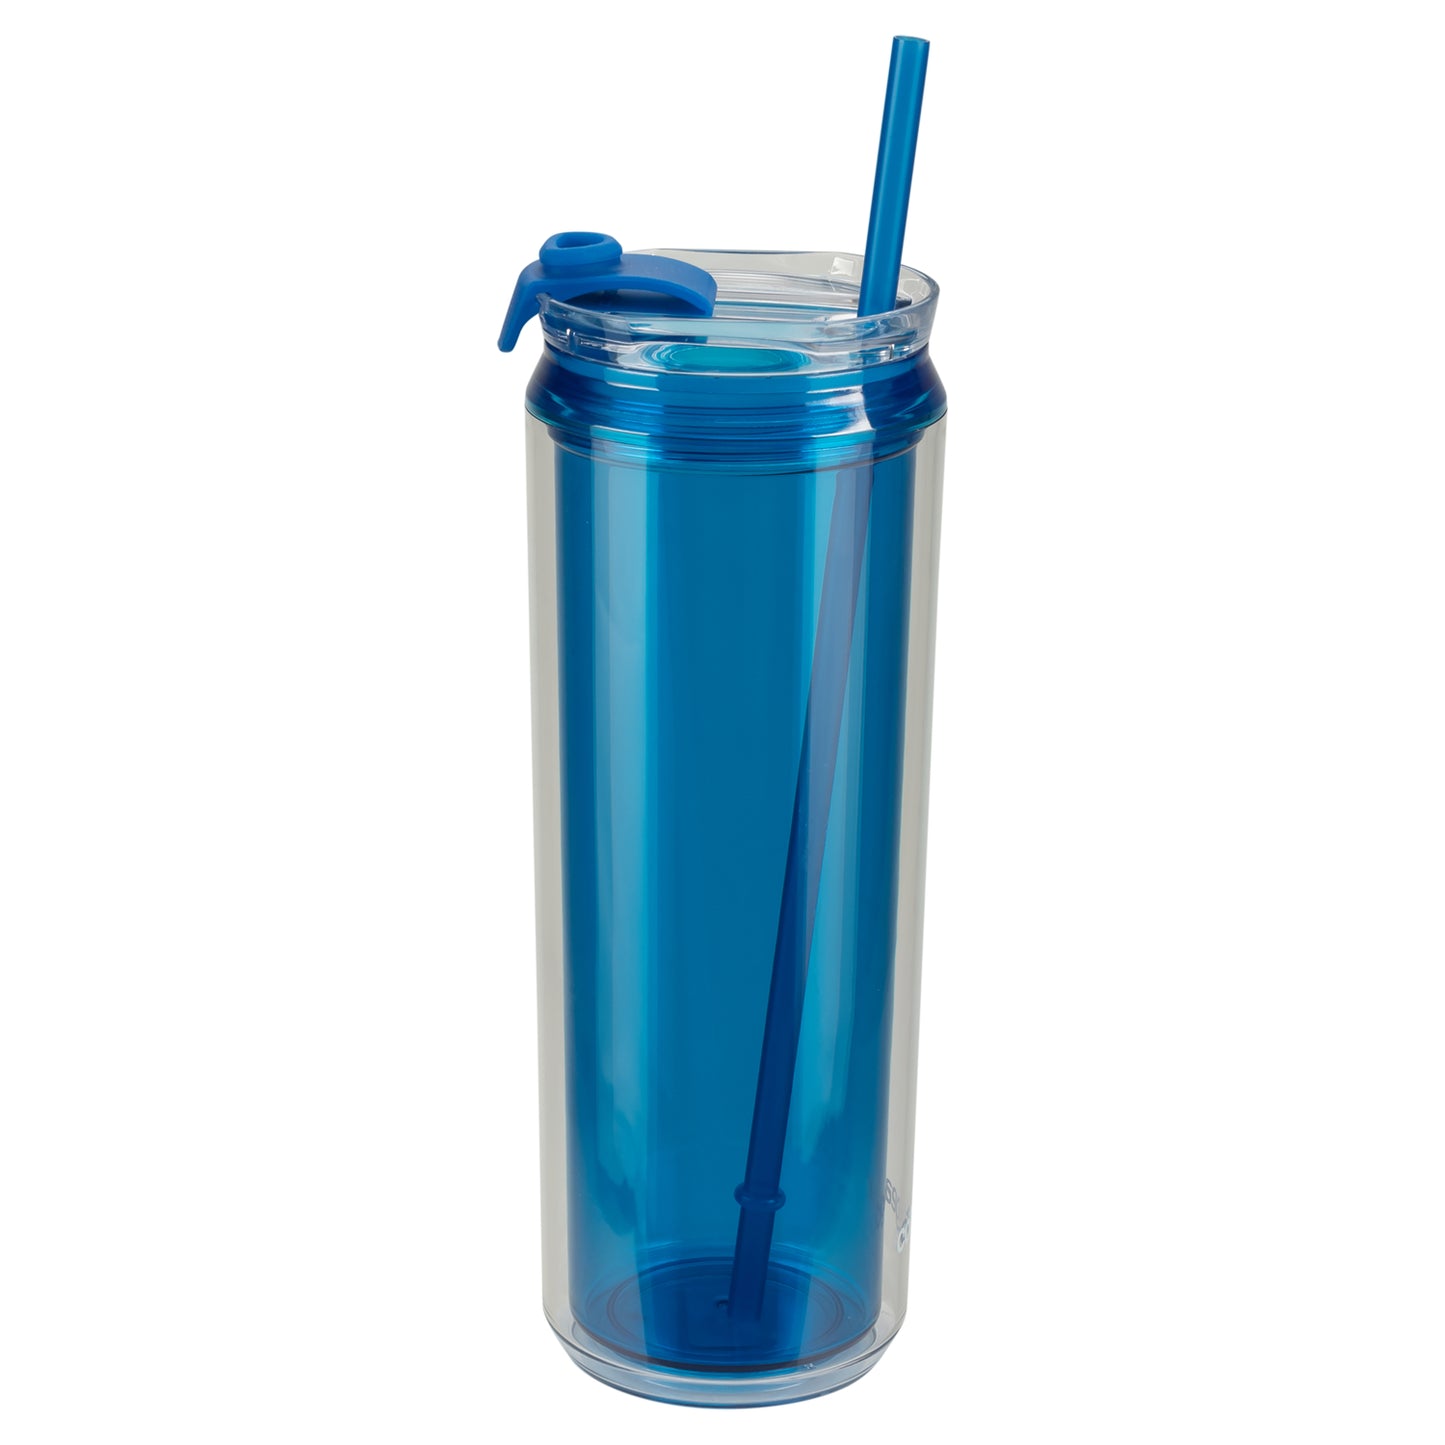 Cool Gear 3-Pack 22 oz Modern Tumbler with Reusable Straw | Dishwasher Safe, Cup Holder Friendly, Spillproof, Double-Wall Insulated Travel Tumbler | Solid Blueberry Pack